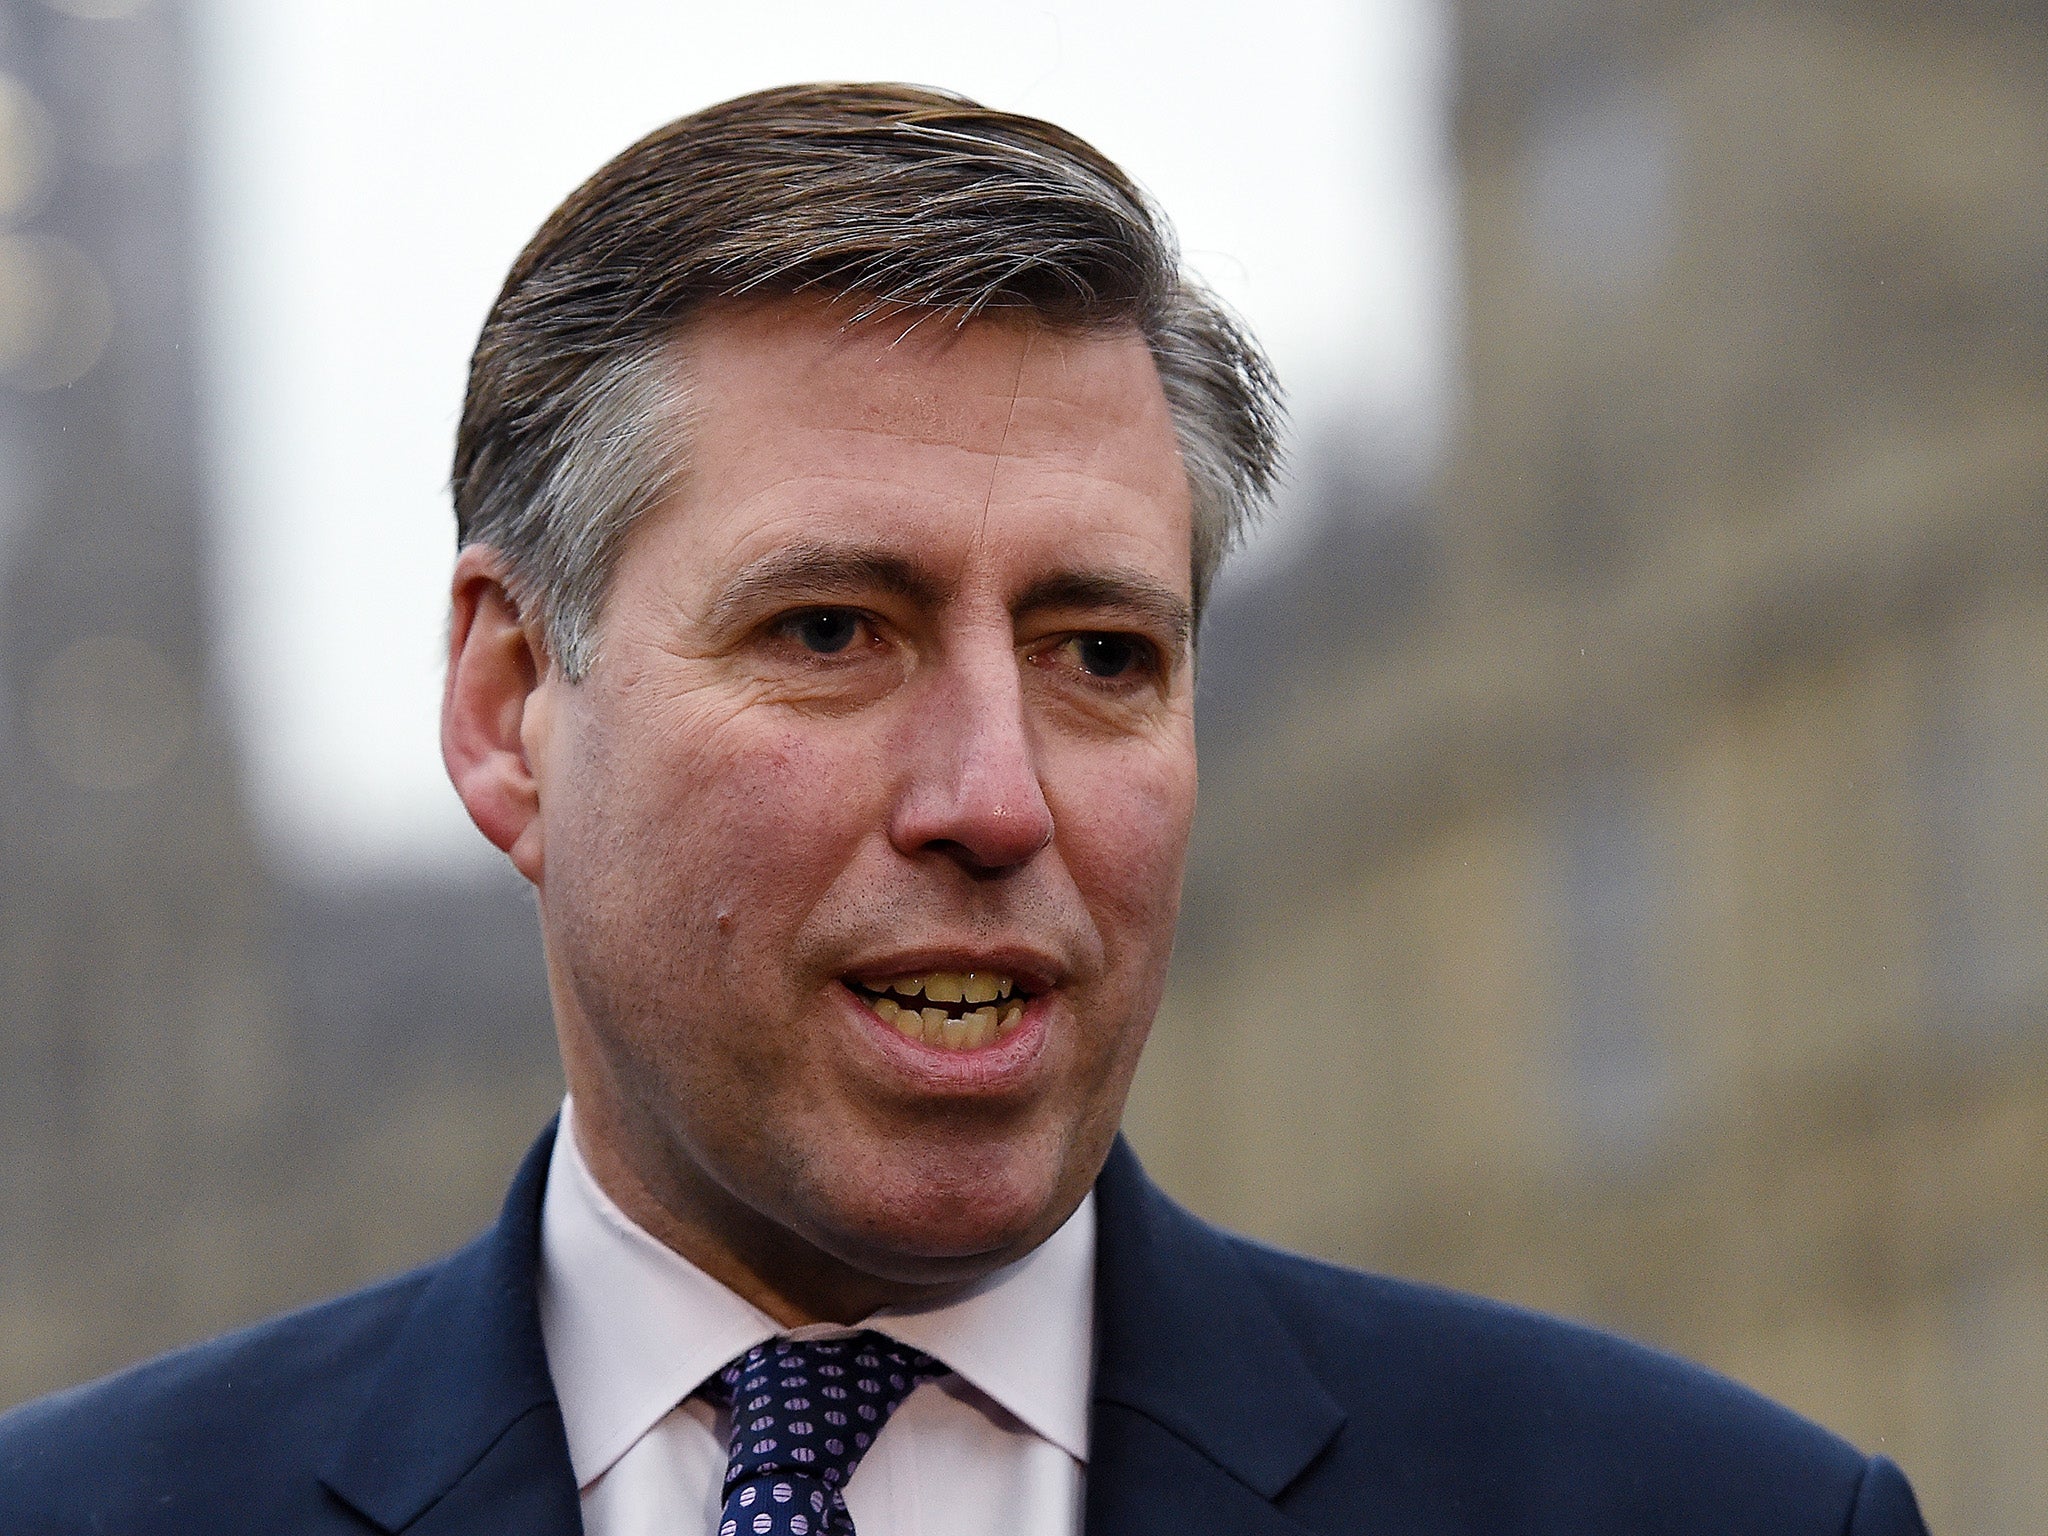 Chair of the 1922 Committee, Sir Graham Brady, has given one last shot of adrenalin to Theresa May’s deal